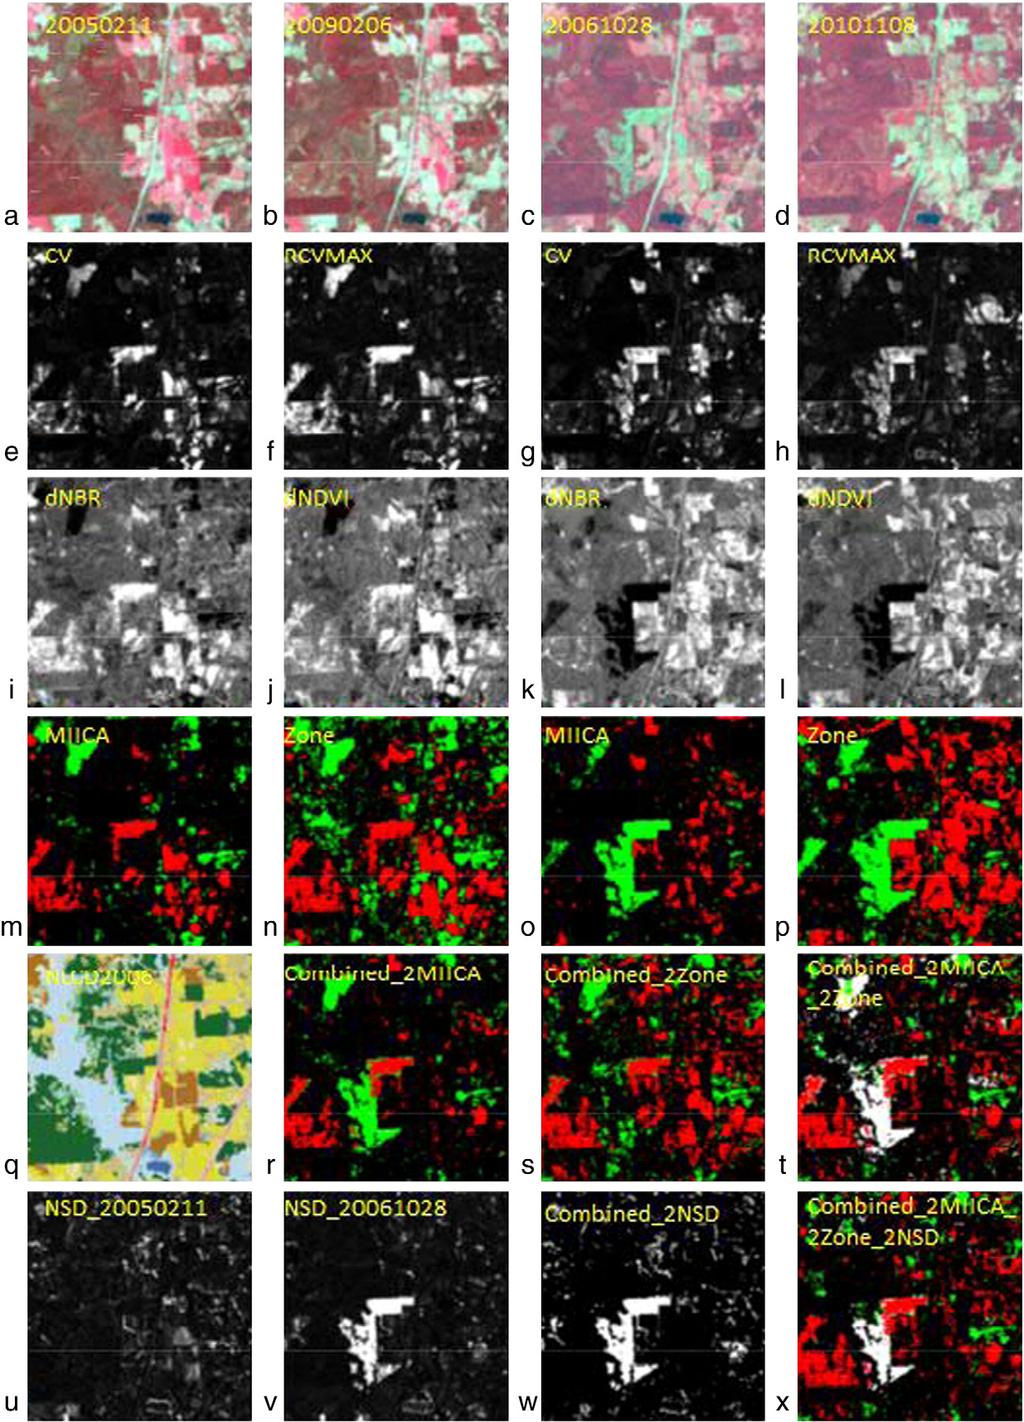 168 S. Jin et al. / Remote Sensing of Environment 132 (2013) 159 175 Fig. 8. The change detection procedure is demonstrated for subset-2 area. The images are arranged in the same order as Fig. 7.